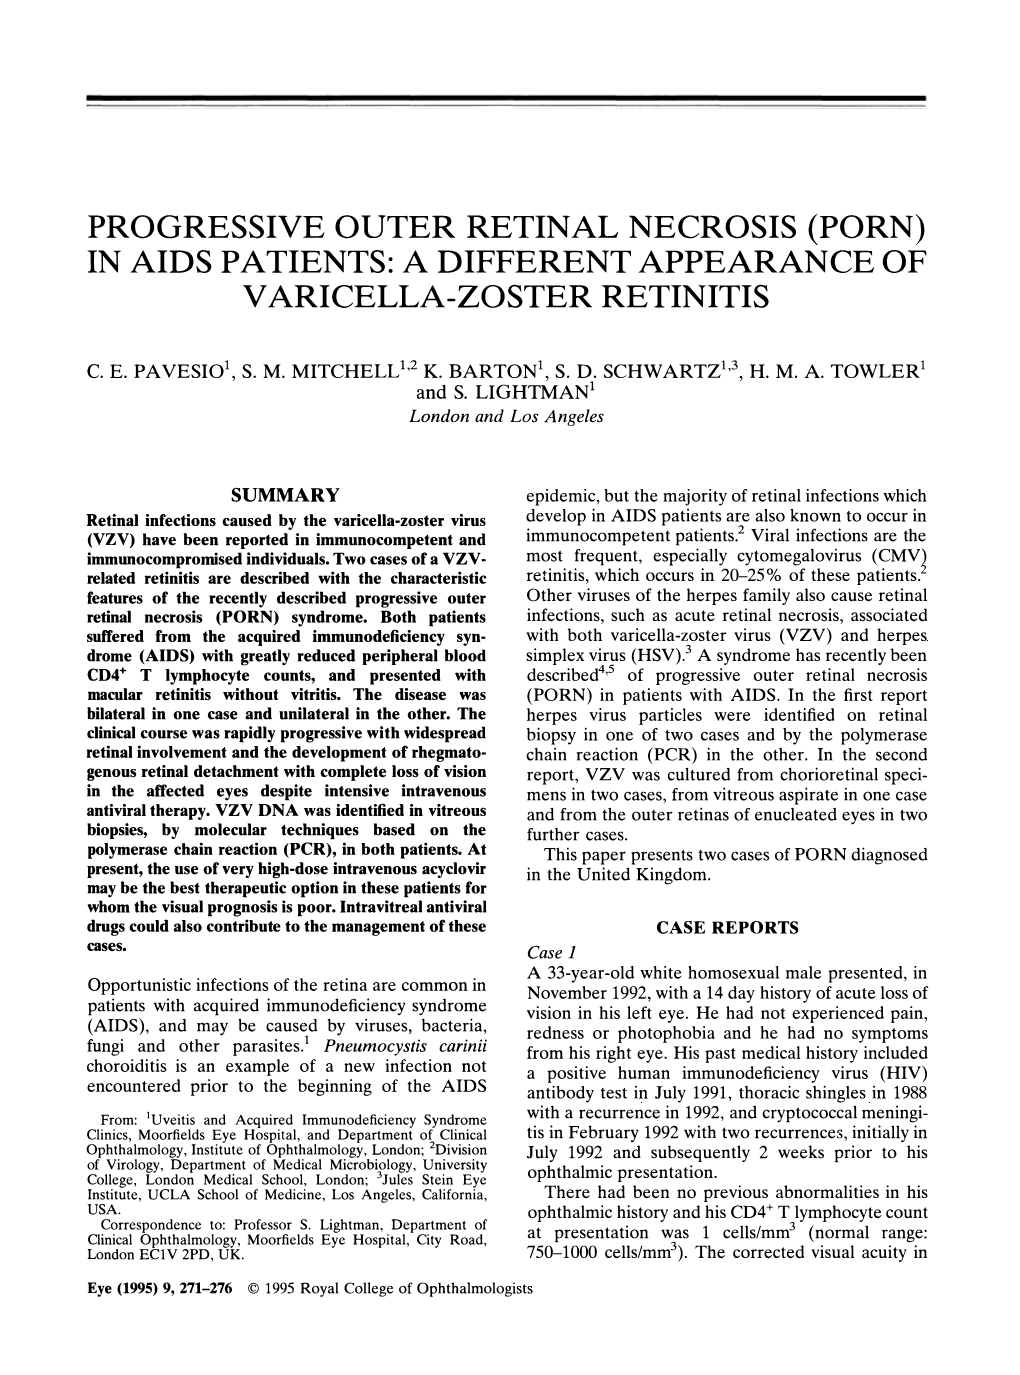 Progressive Outer Retinal Necrosis (Porn) in Aids Patients: a Different Appearance of Varicella-Zoster Retinitis